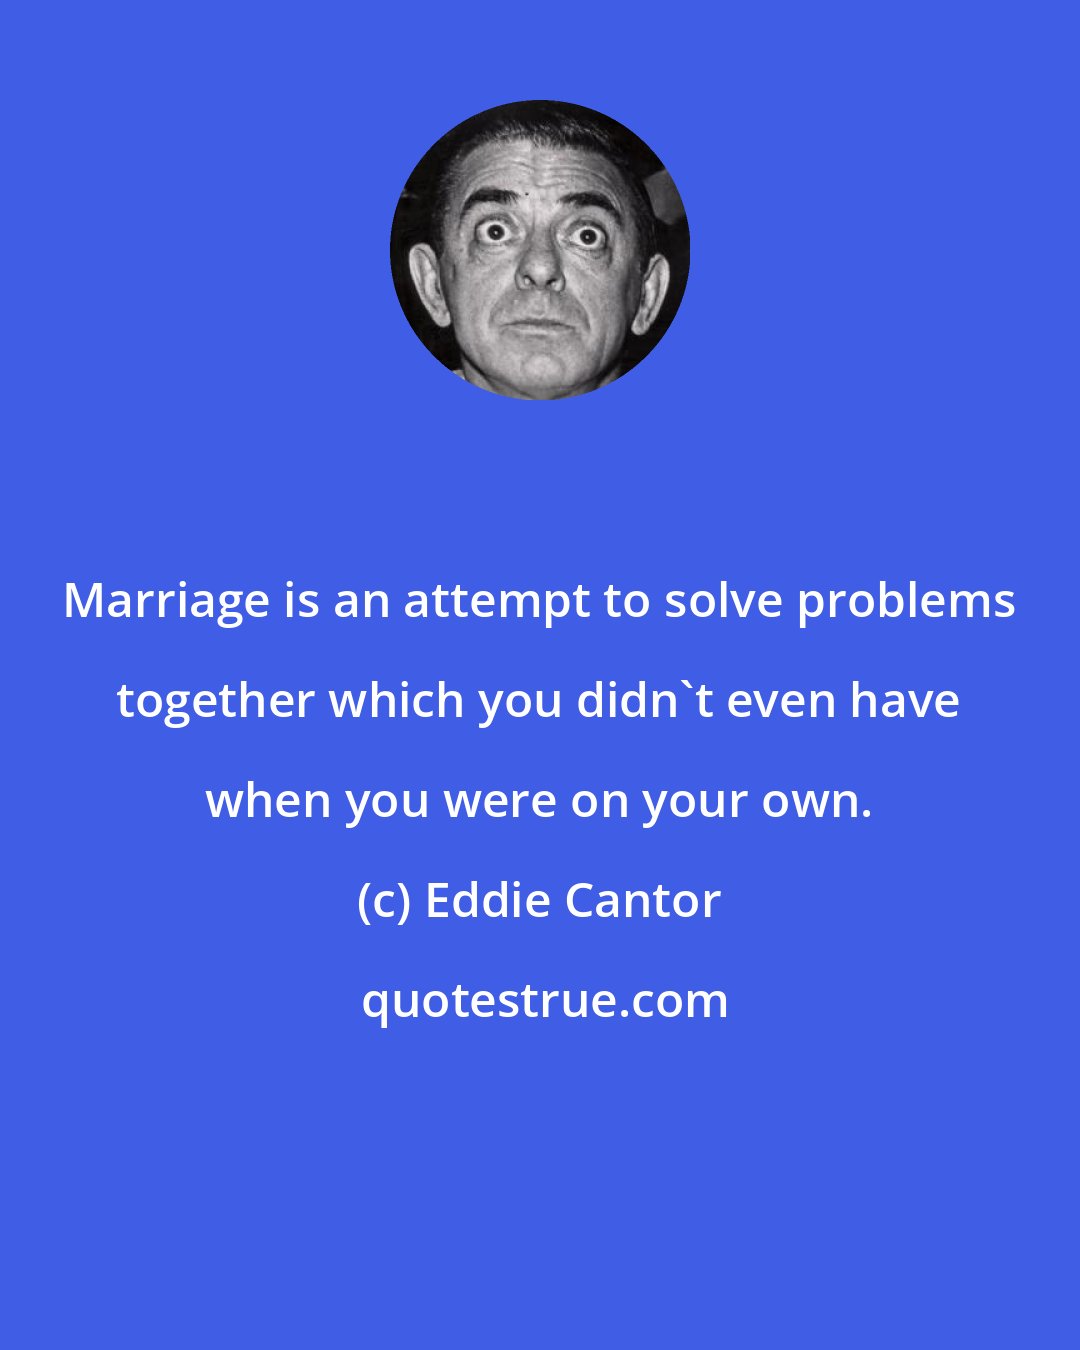 Eddie Cantor: Marriage is an attempt to solve problems together which you didn't even have when you were on your own.